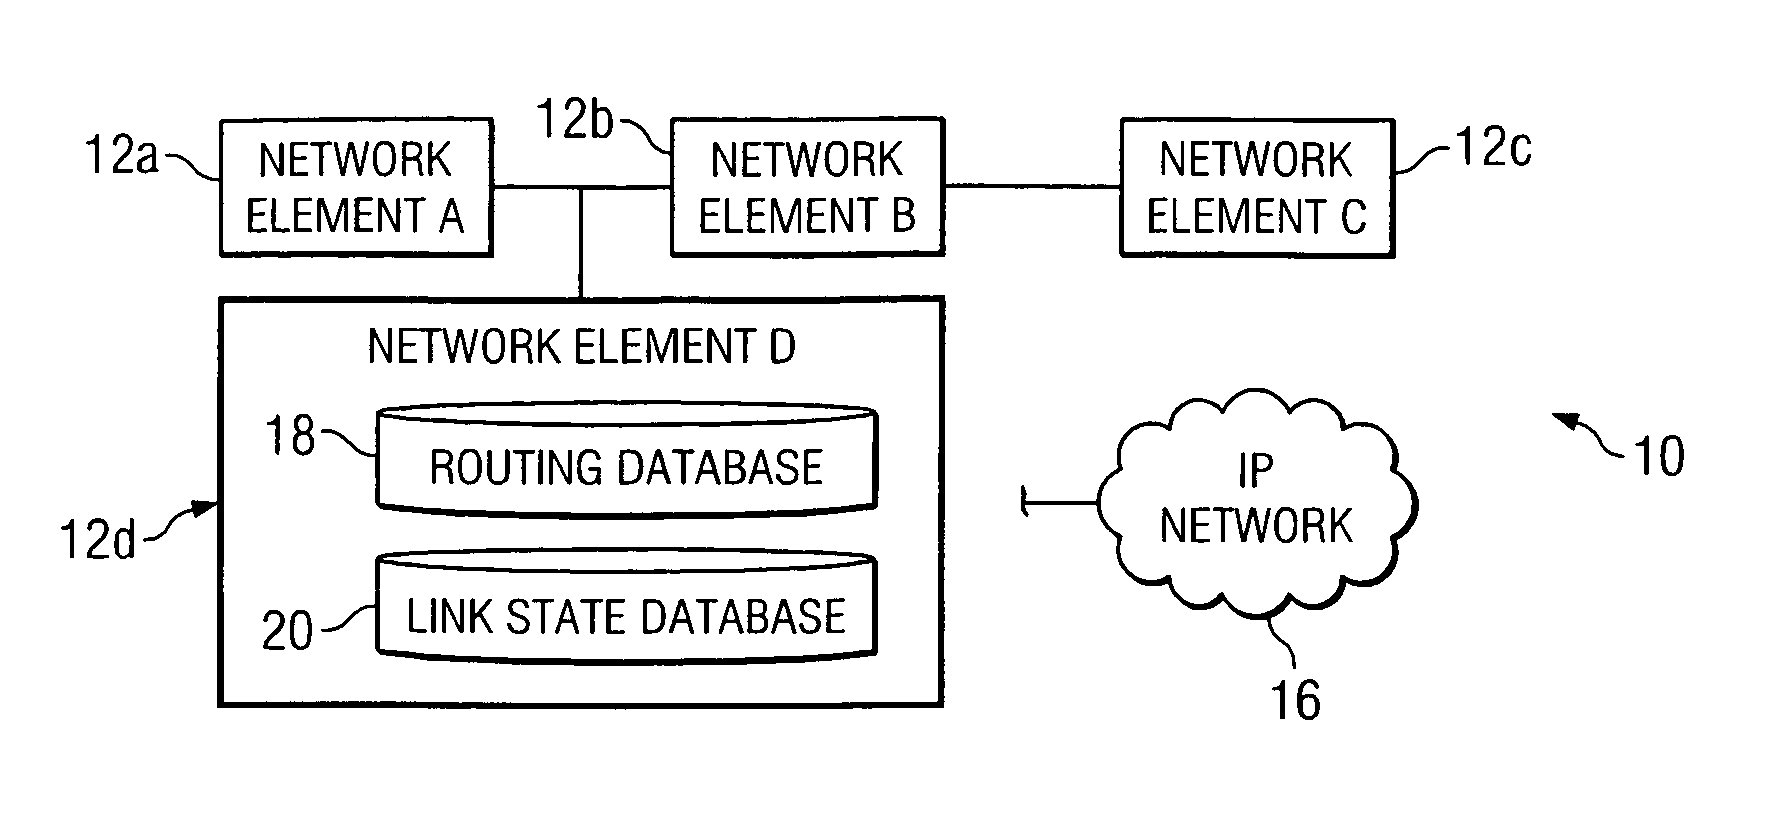 System and method for reducing information being transmitted in a network environment